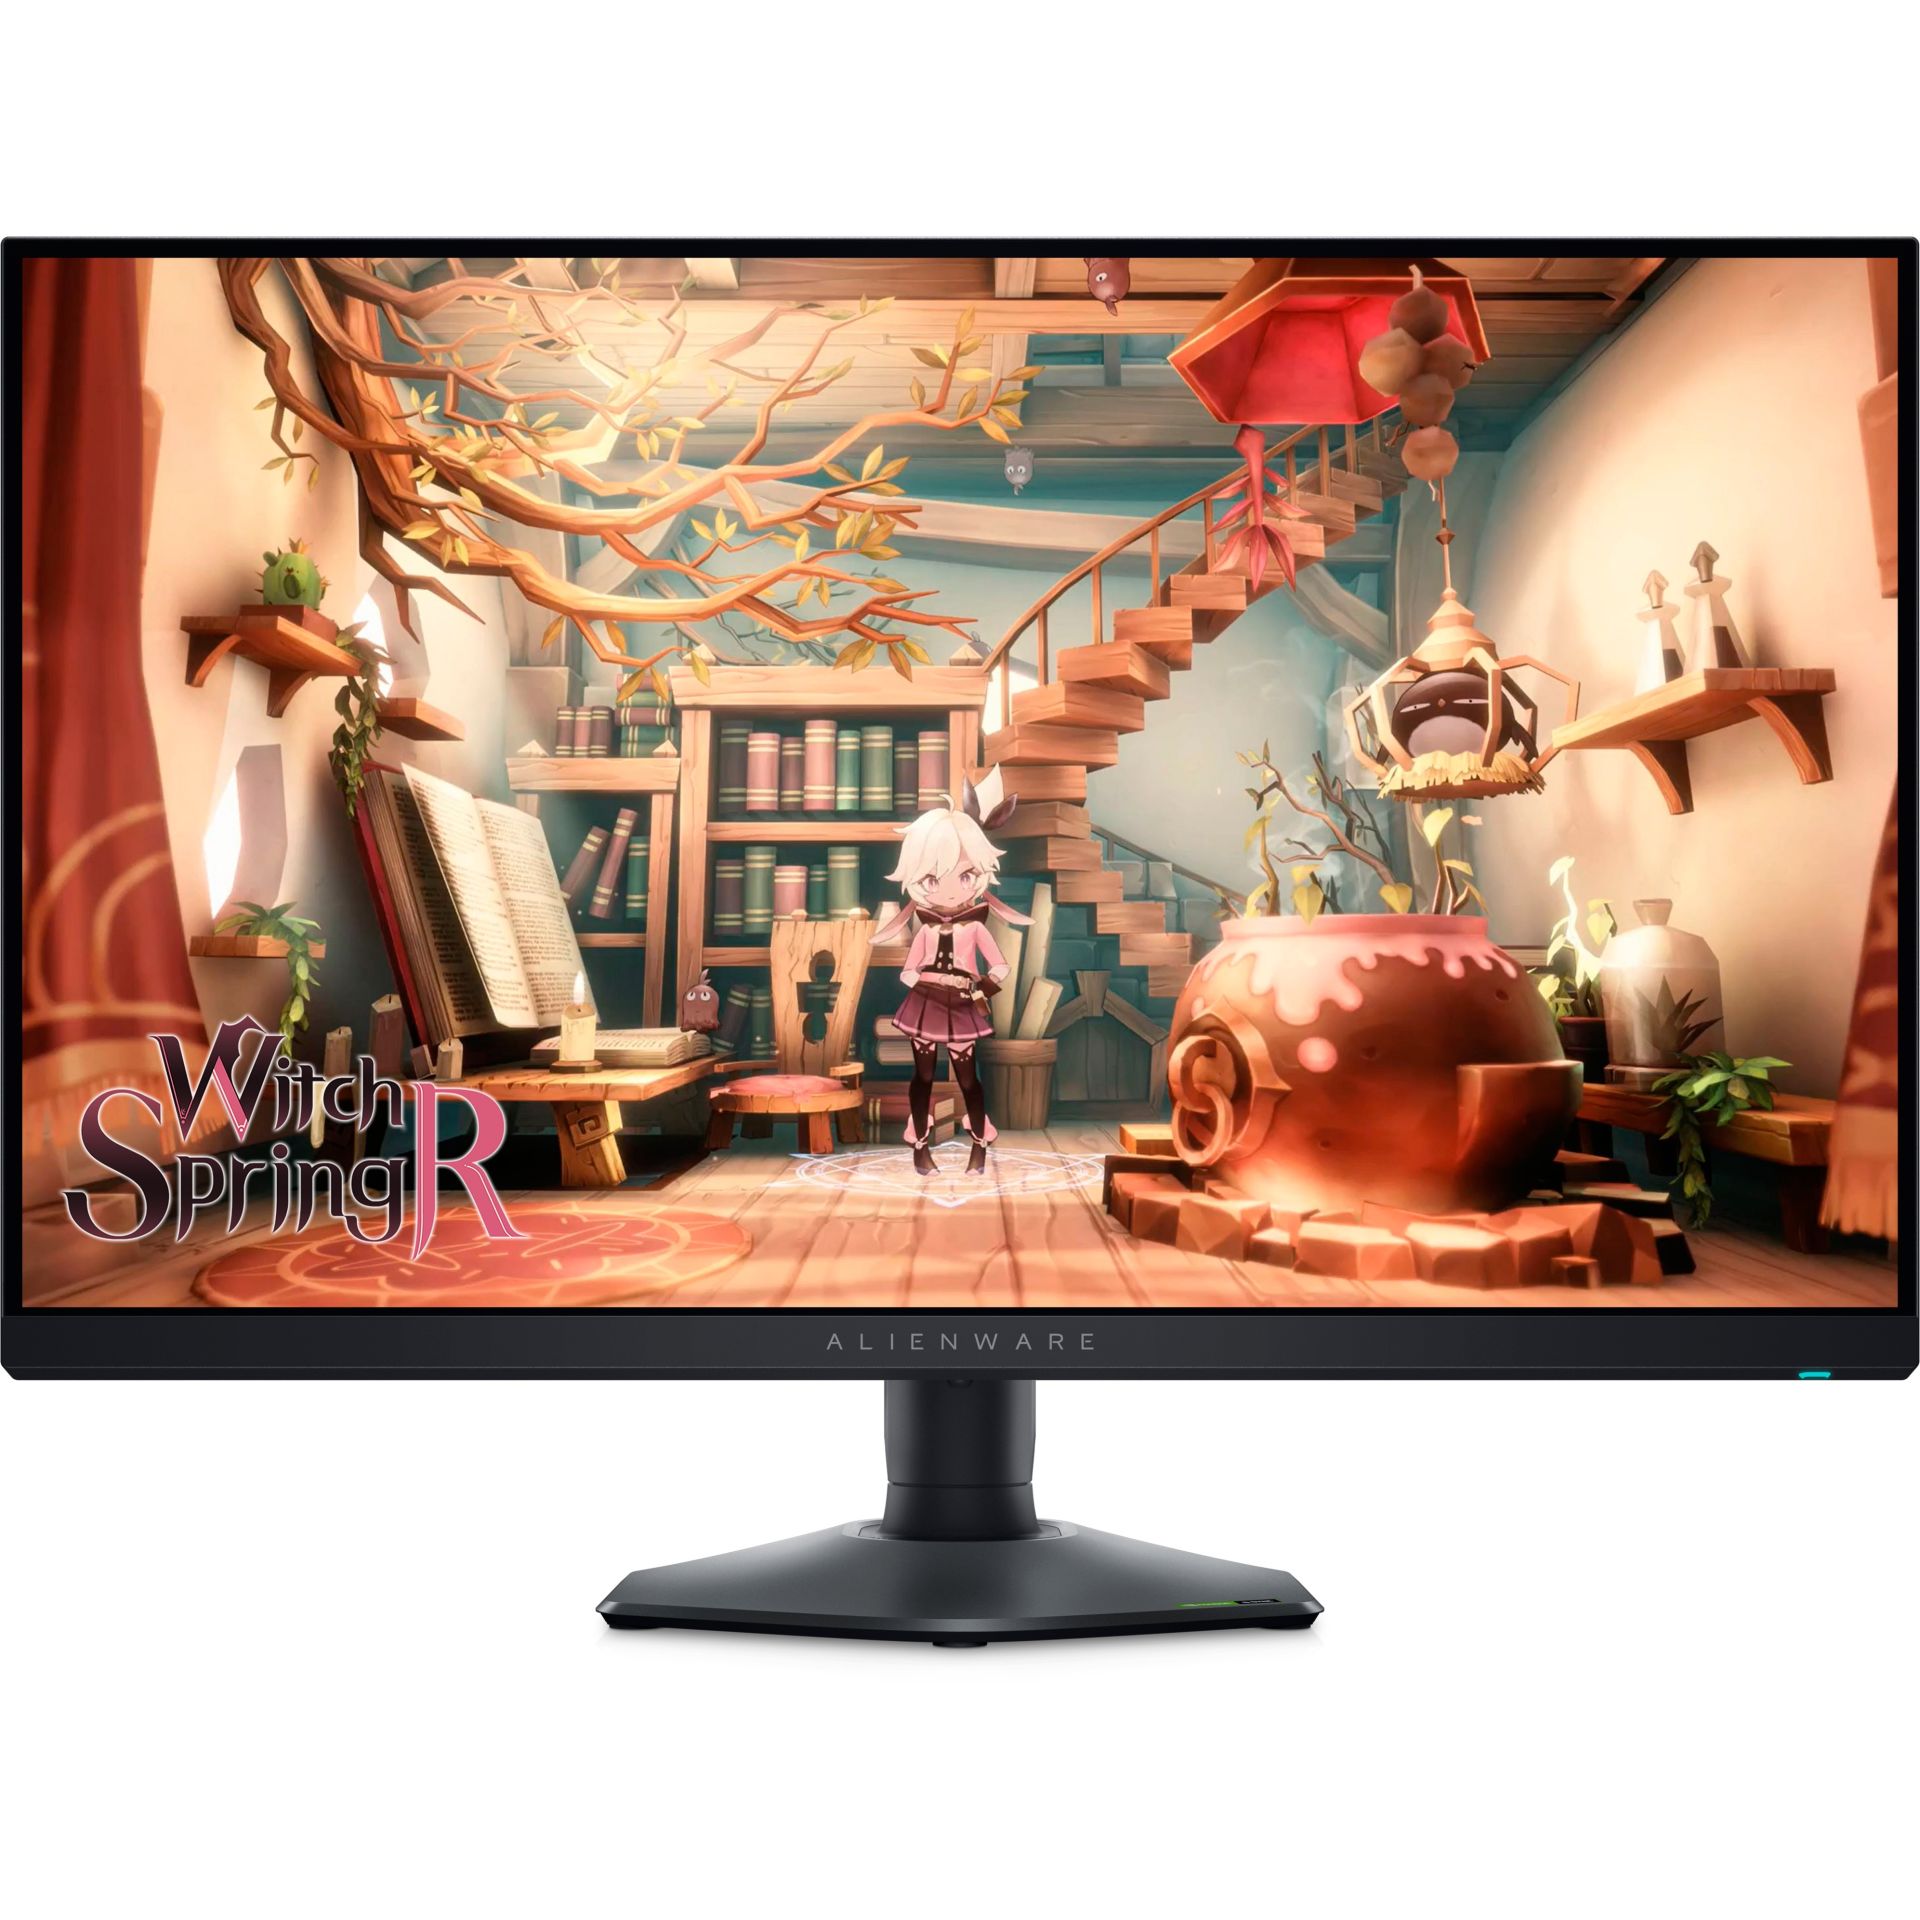 DELL ALIENWARE AW2724DM 27'' 1MS 180Hz 2K 2560x1440 HDMI/DP PIVOT IPS LED GAMING MONITOR